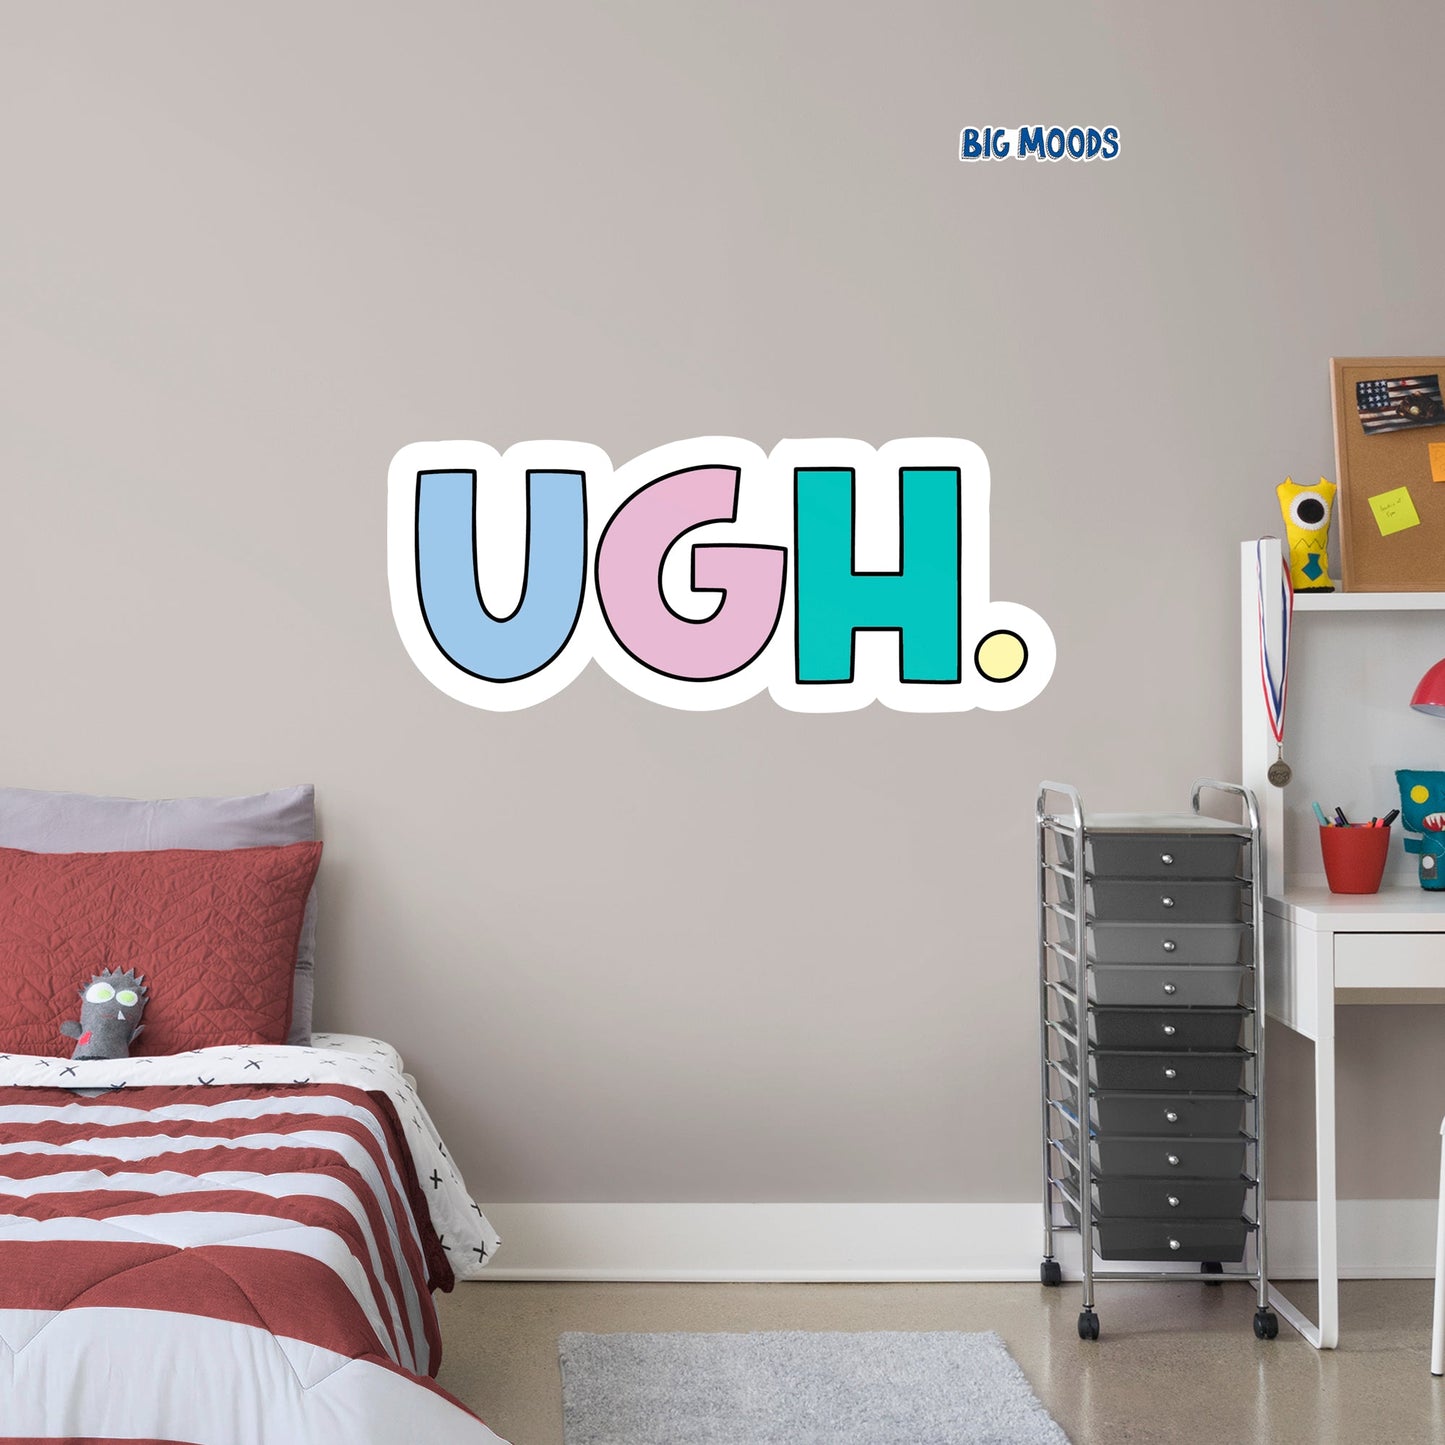 Ugh (Multi-Color)        - Officially Licensed Big Moods Removable     Adhesive Decal